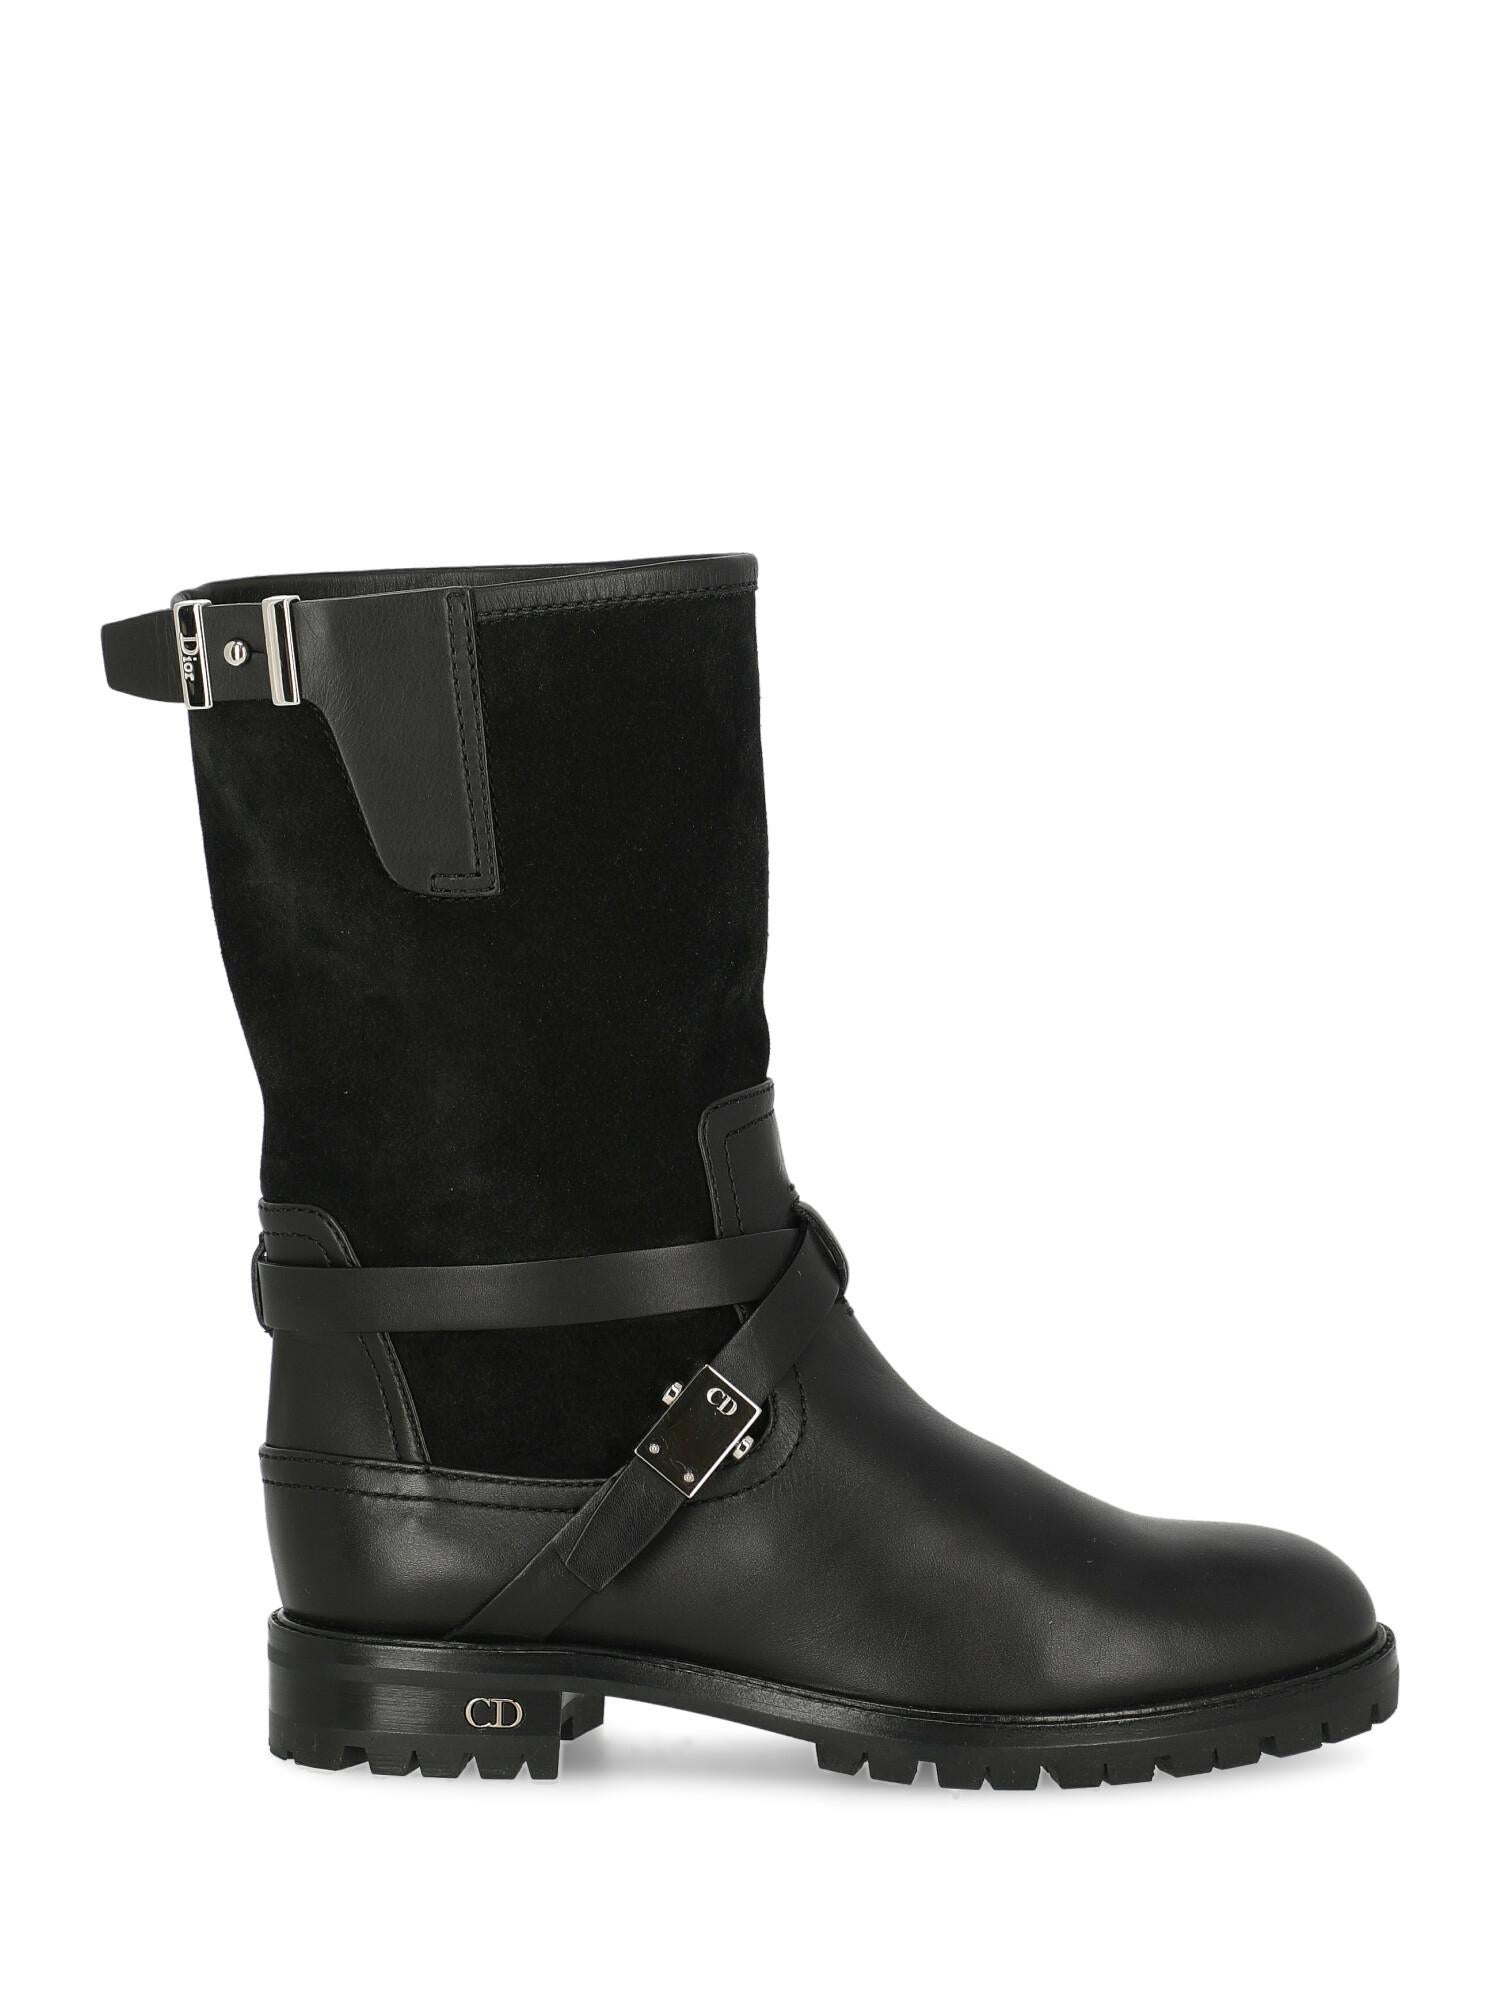 Dior Woman Ankle boots Black Leather IT 35.5 For Sale 1